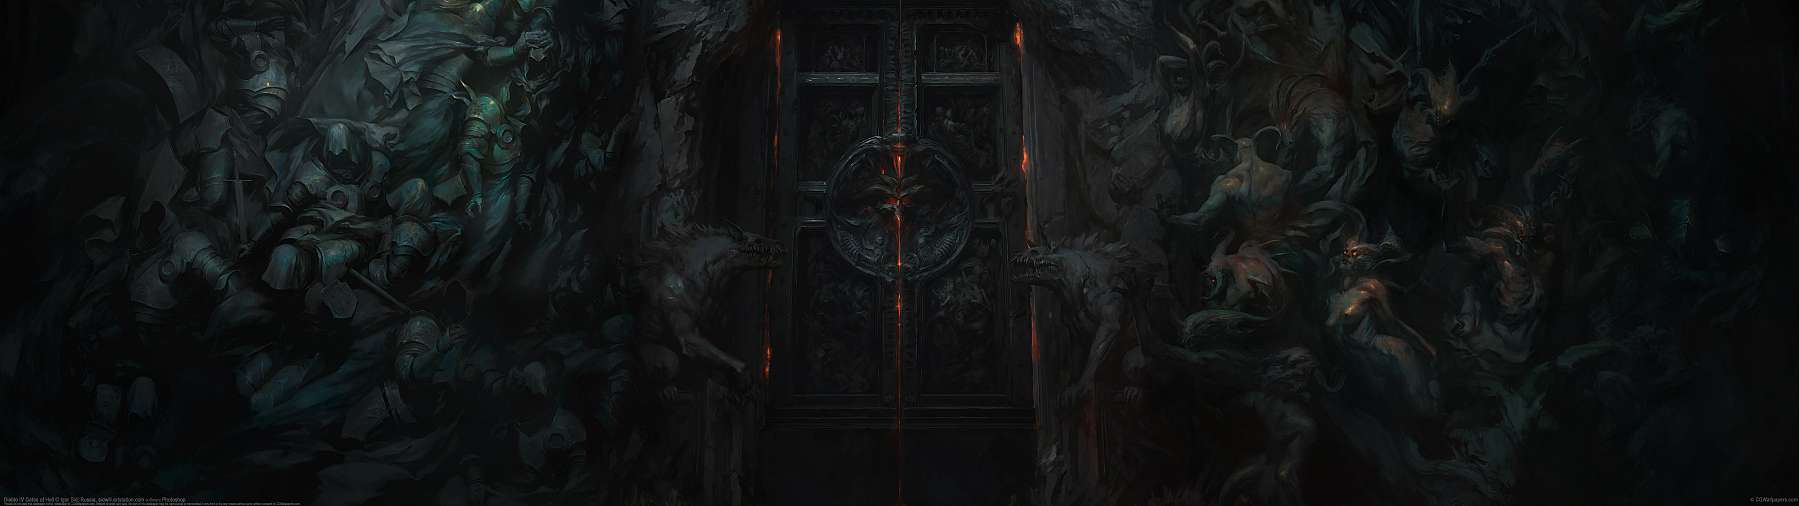 Diablo IV Gates of Hell ultrawide achtergrond